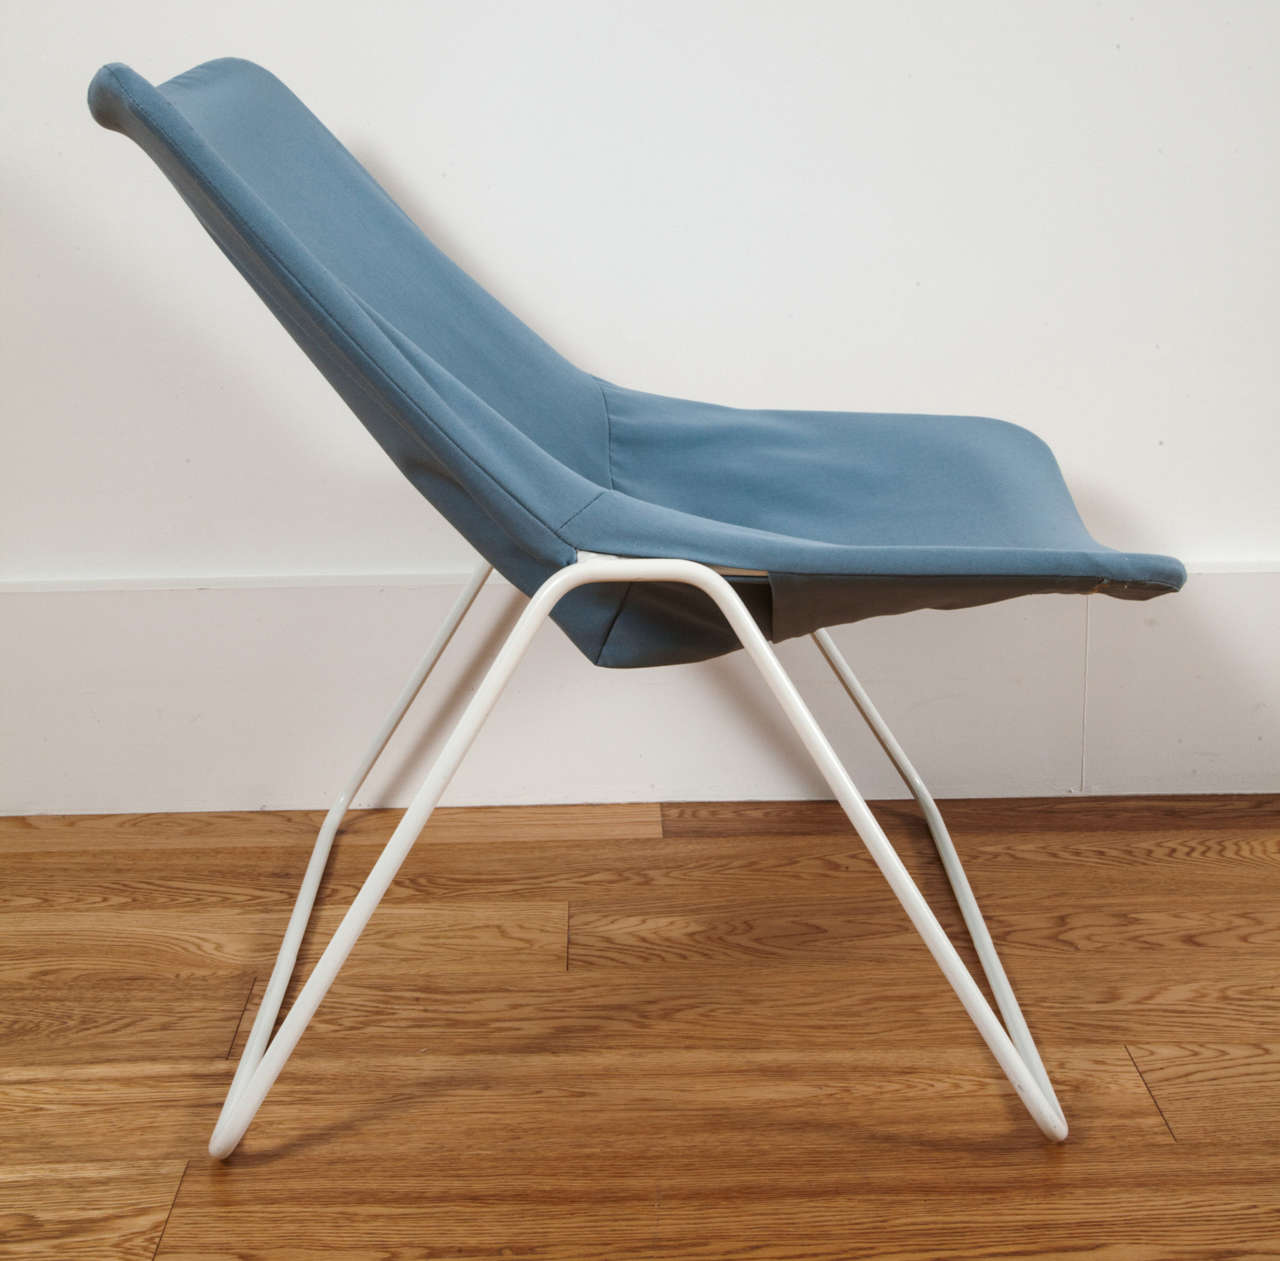 Chair of G1 by Pierre Guariche - Airborne edition - 1953 For Sale 1